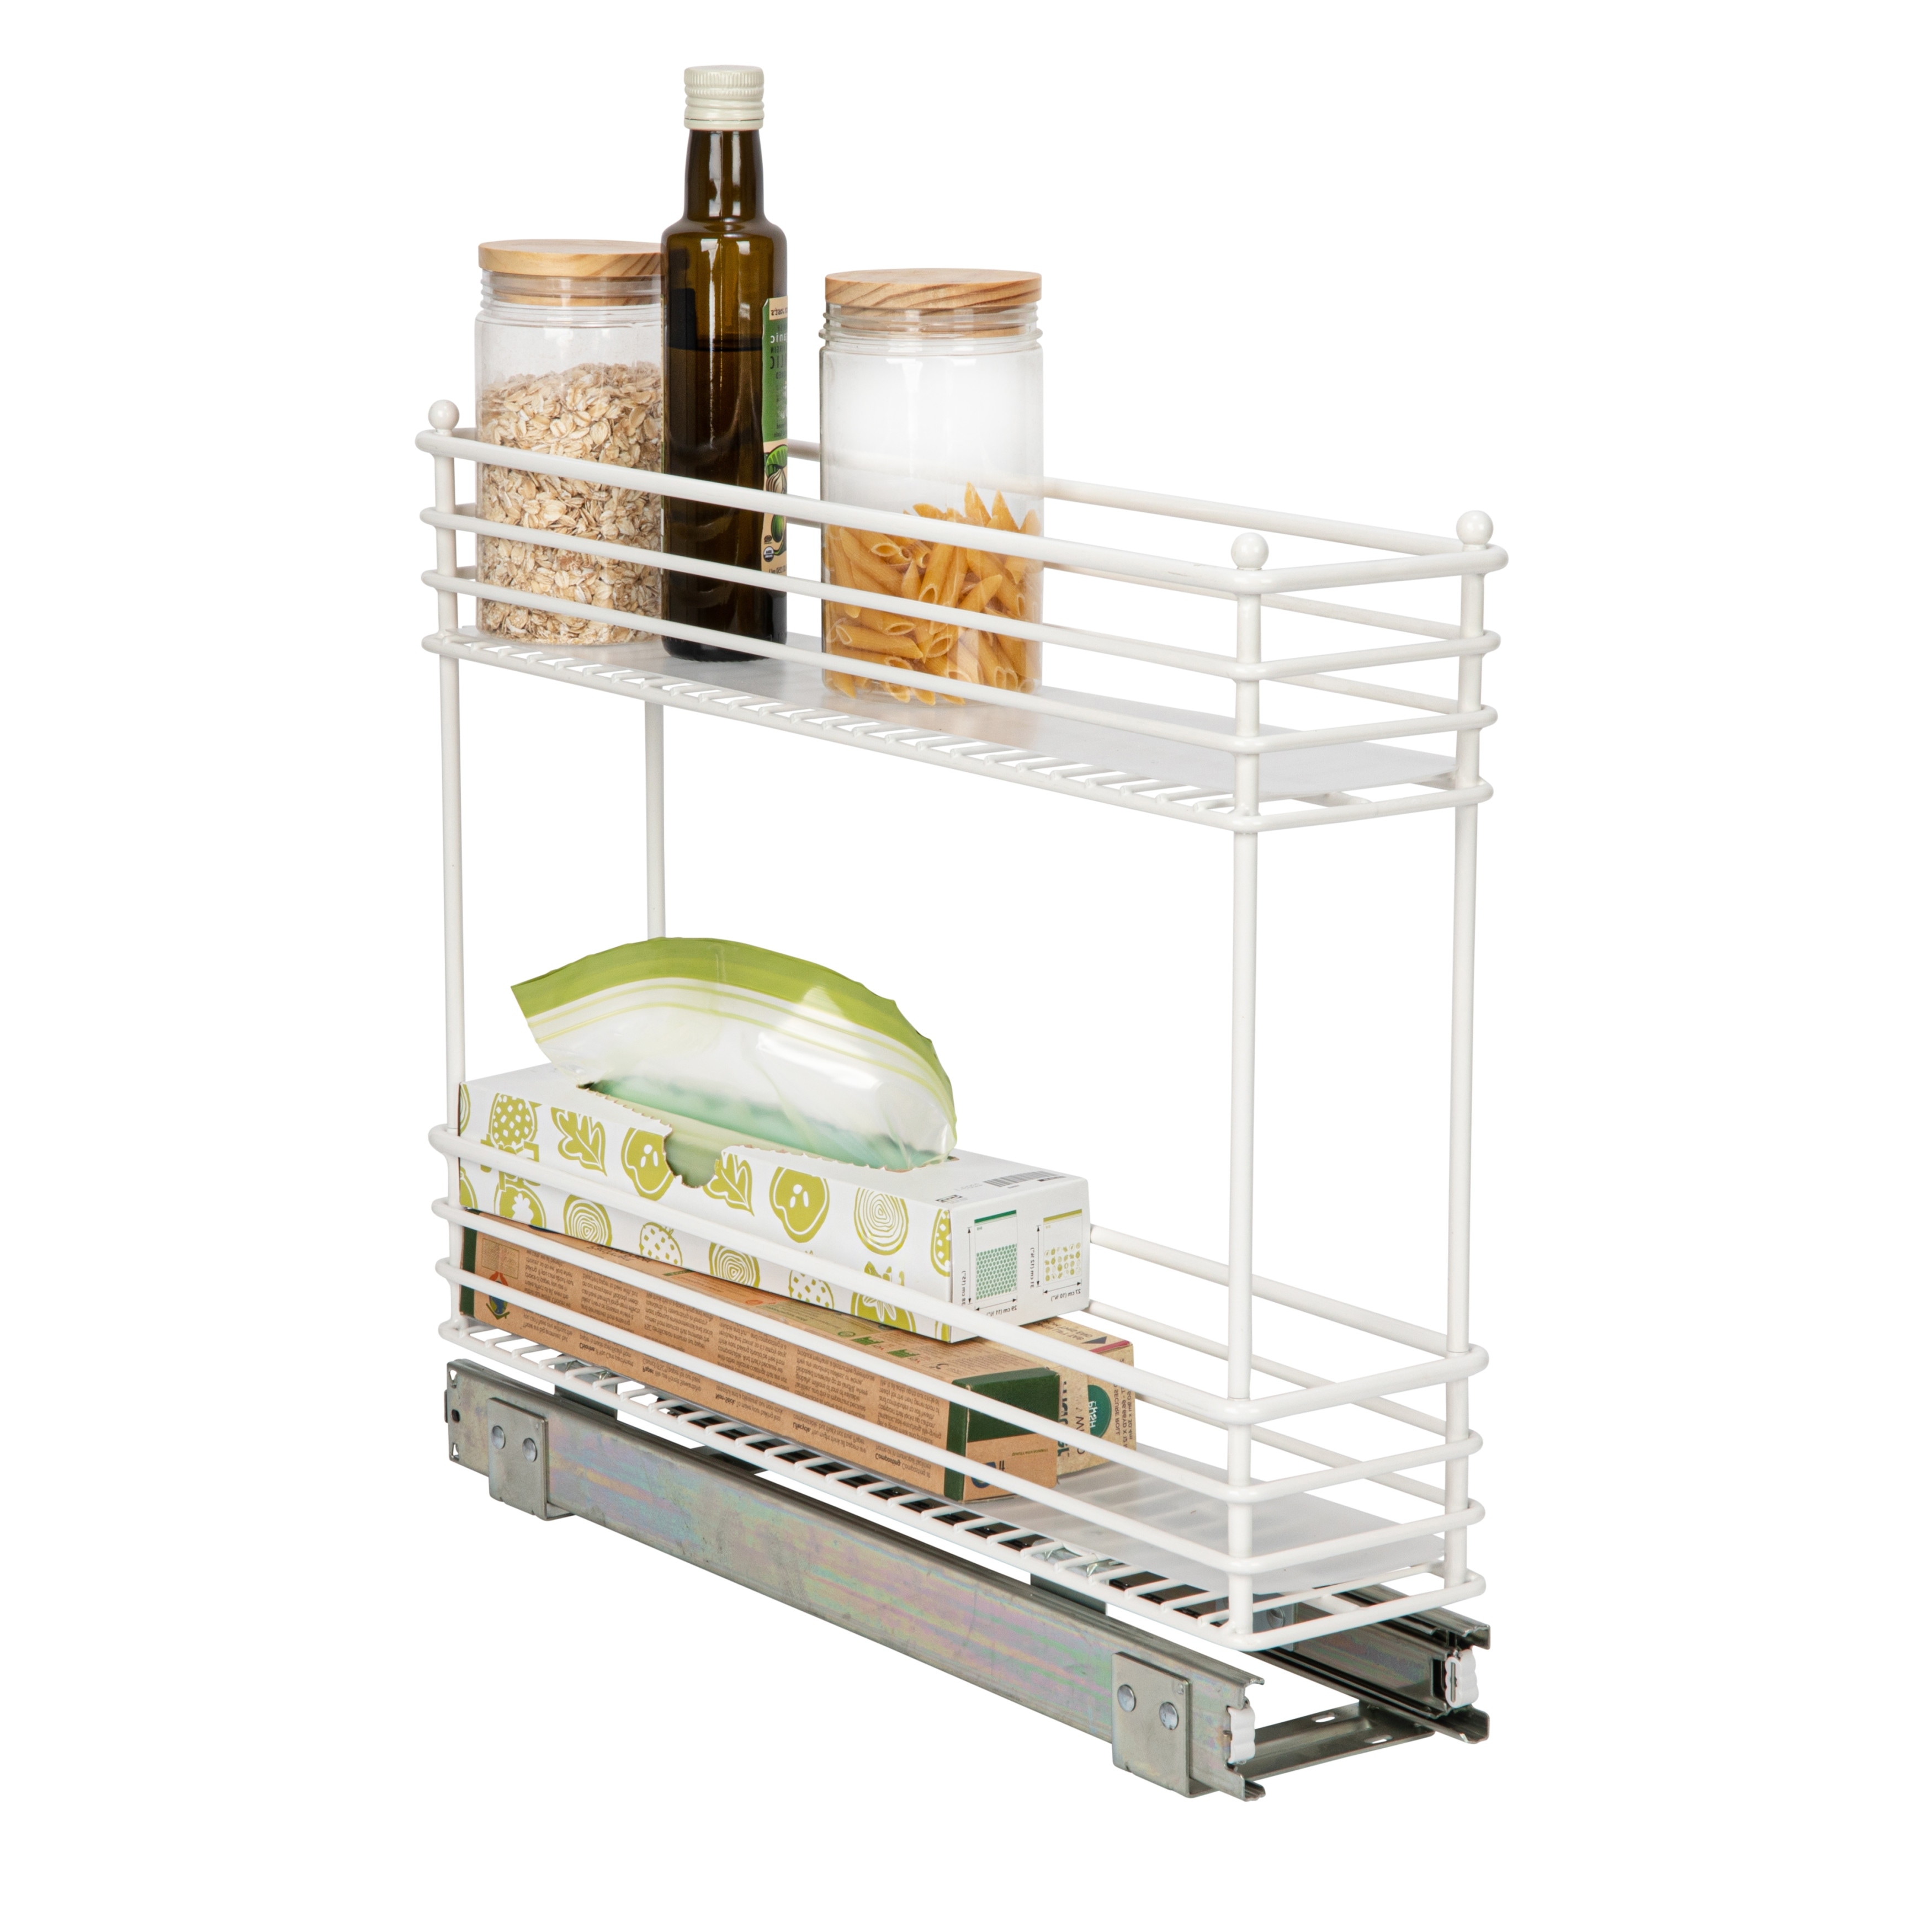 https://ak1.ostkcdn.com/images/products/is/images/direct/2ced83f3571841206c1fc5a4418a03165f24f348/Narrow-Two-Sliding-Cabinet-Organizer%2C-Great-for-Slim-Cabinets-in-Kitchen.jpg